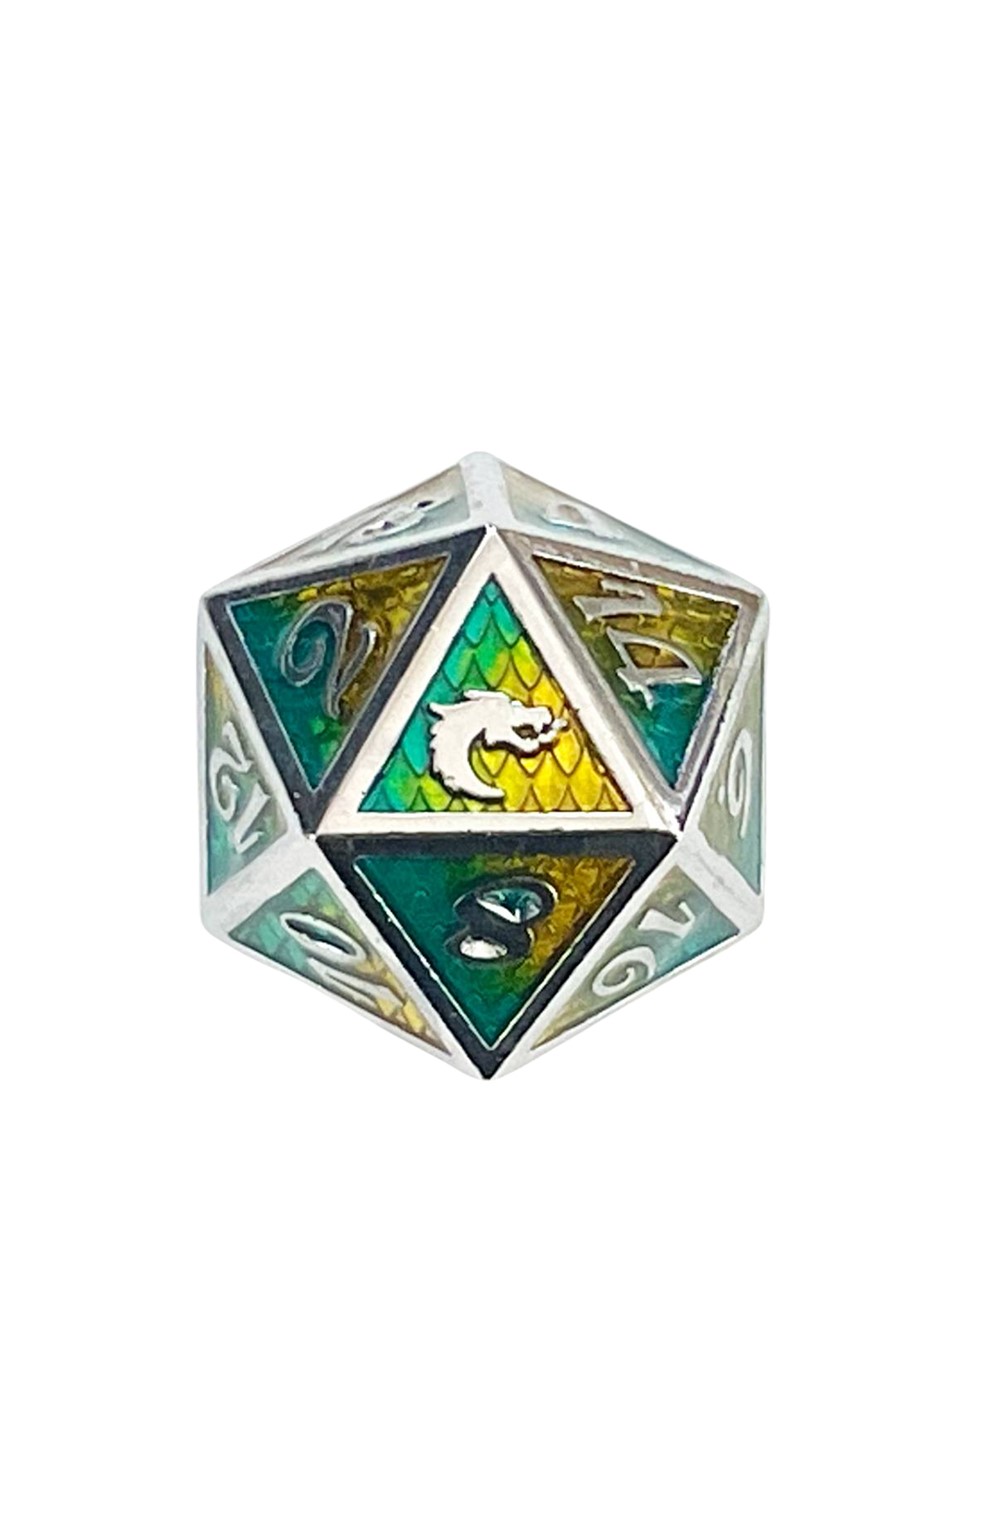 Old School Dnd Rpg Metal D20: Dragon Scale - Green & Yellow